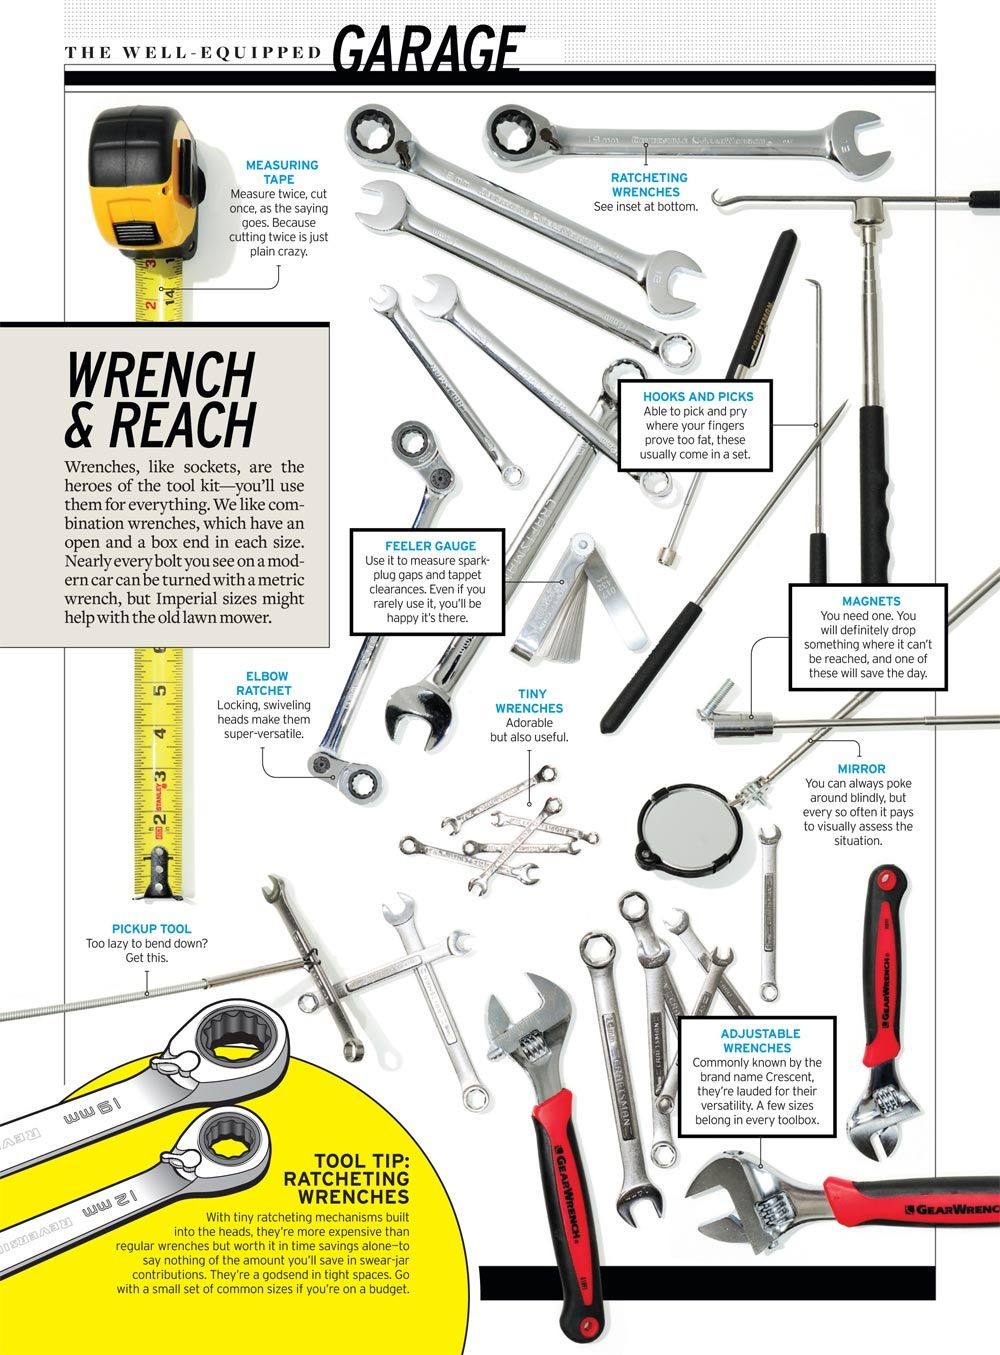 mechanical tools and their names